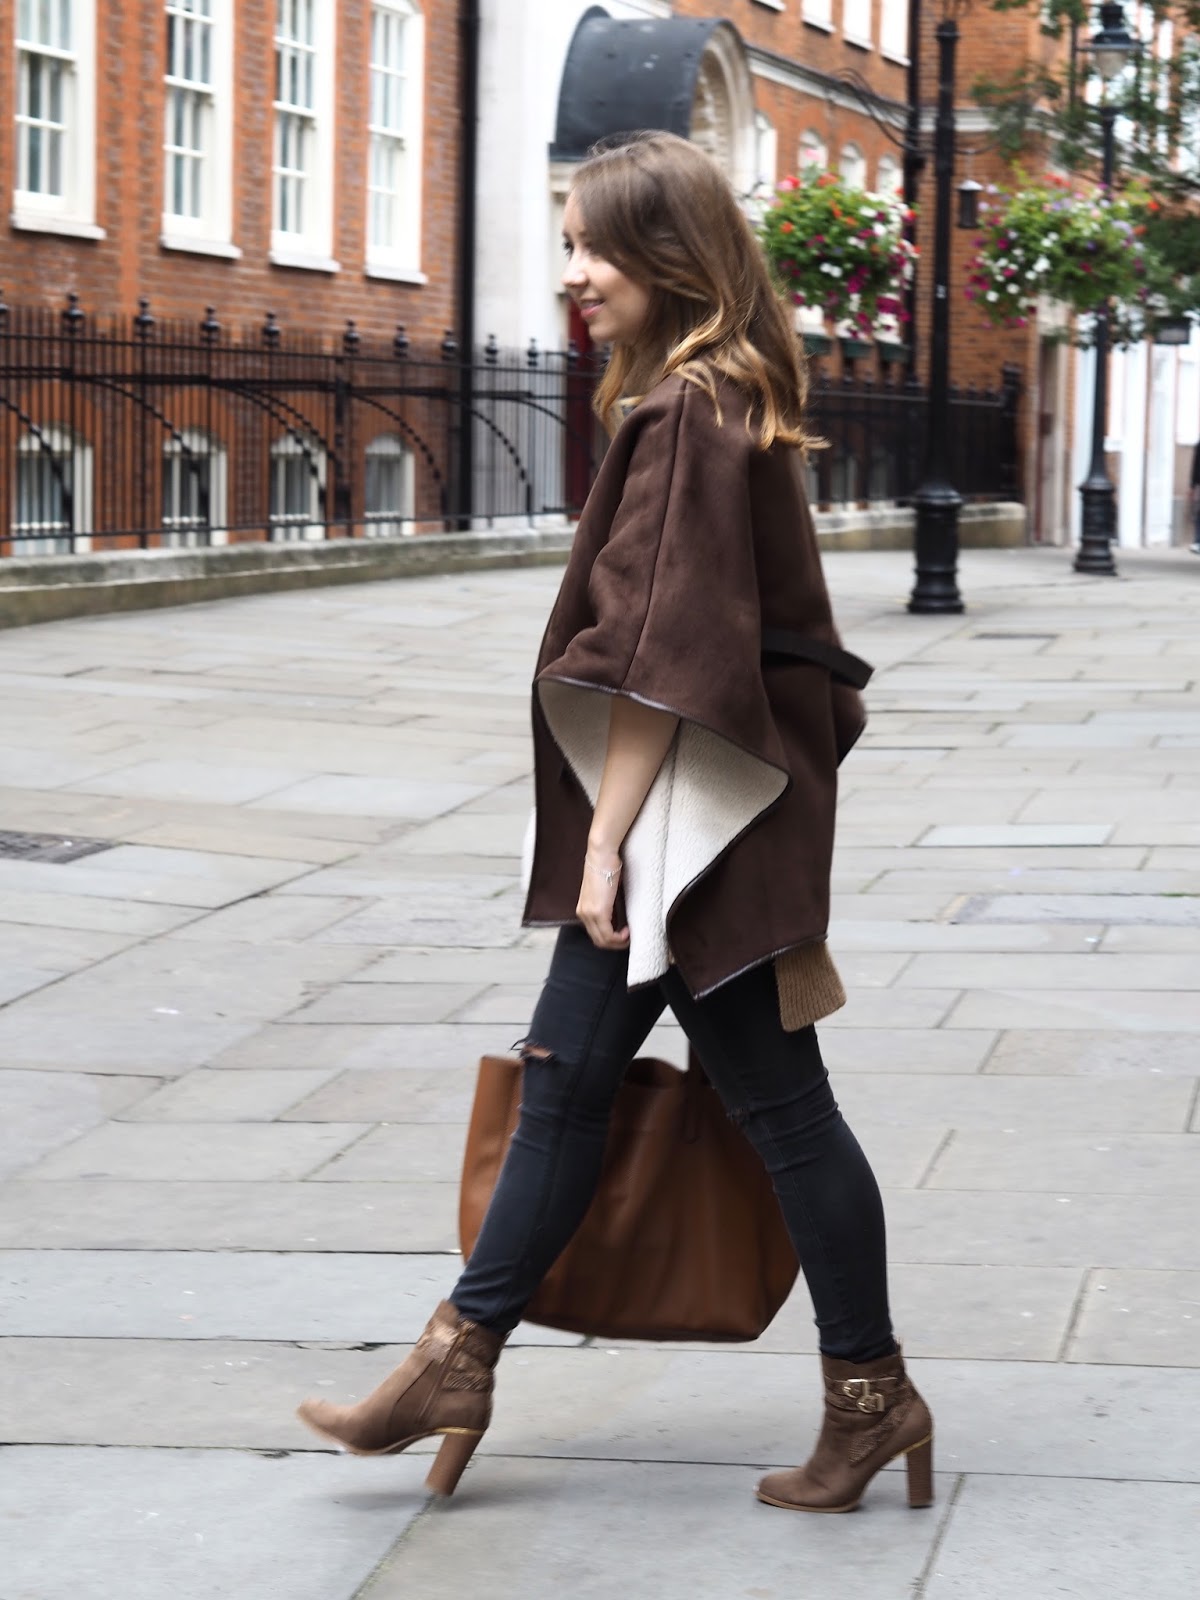 This London Life LFW x Autumnal Outfit